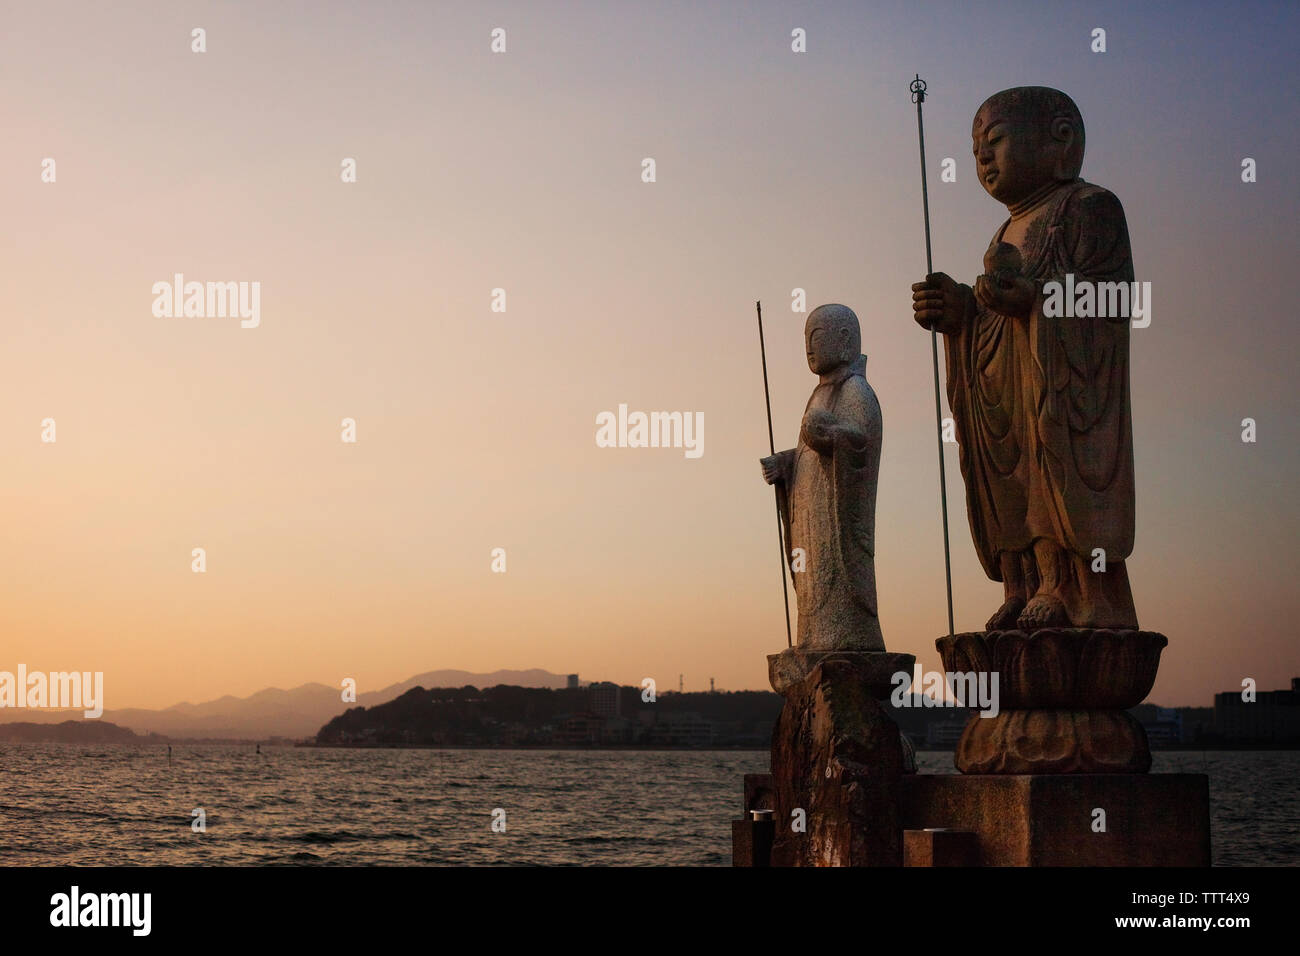 Sculptures by Lake Shinji against clear sky during sunset Stock Photo